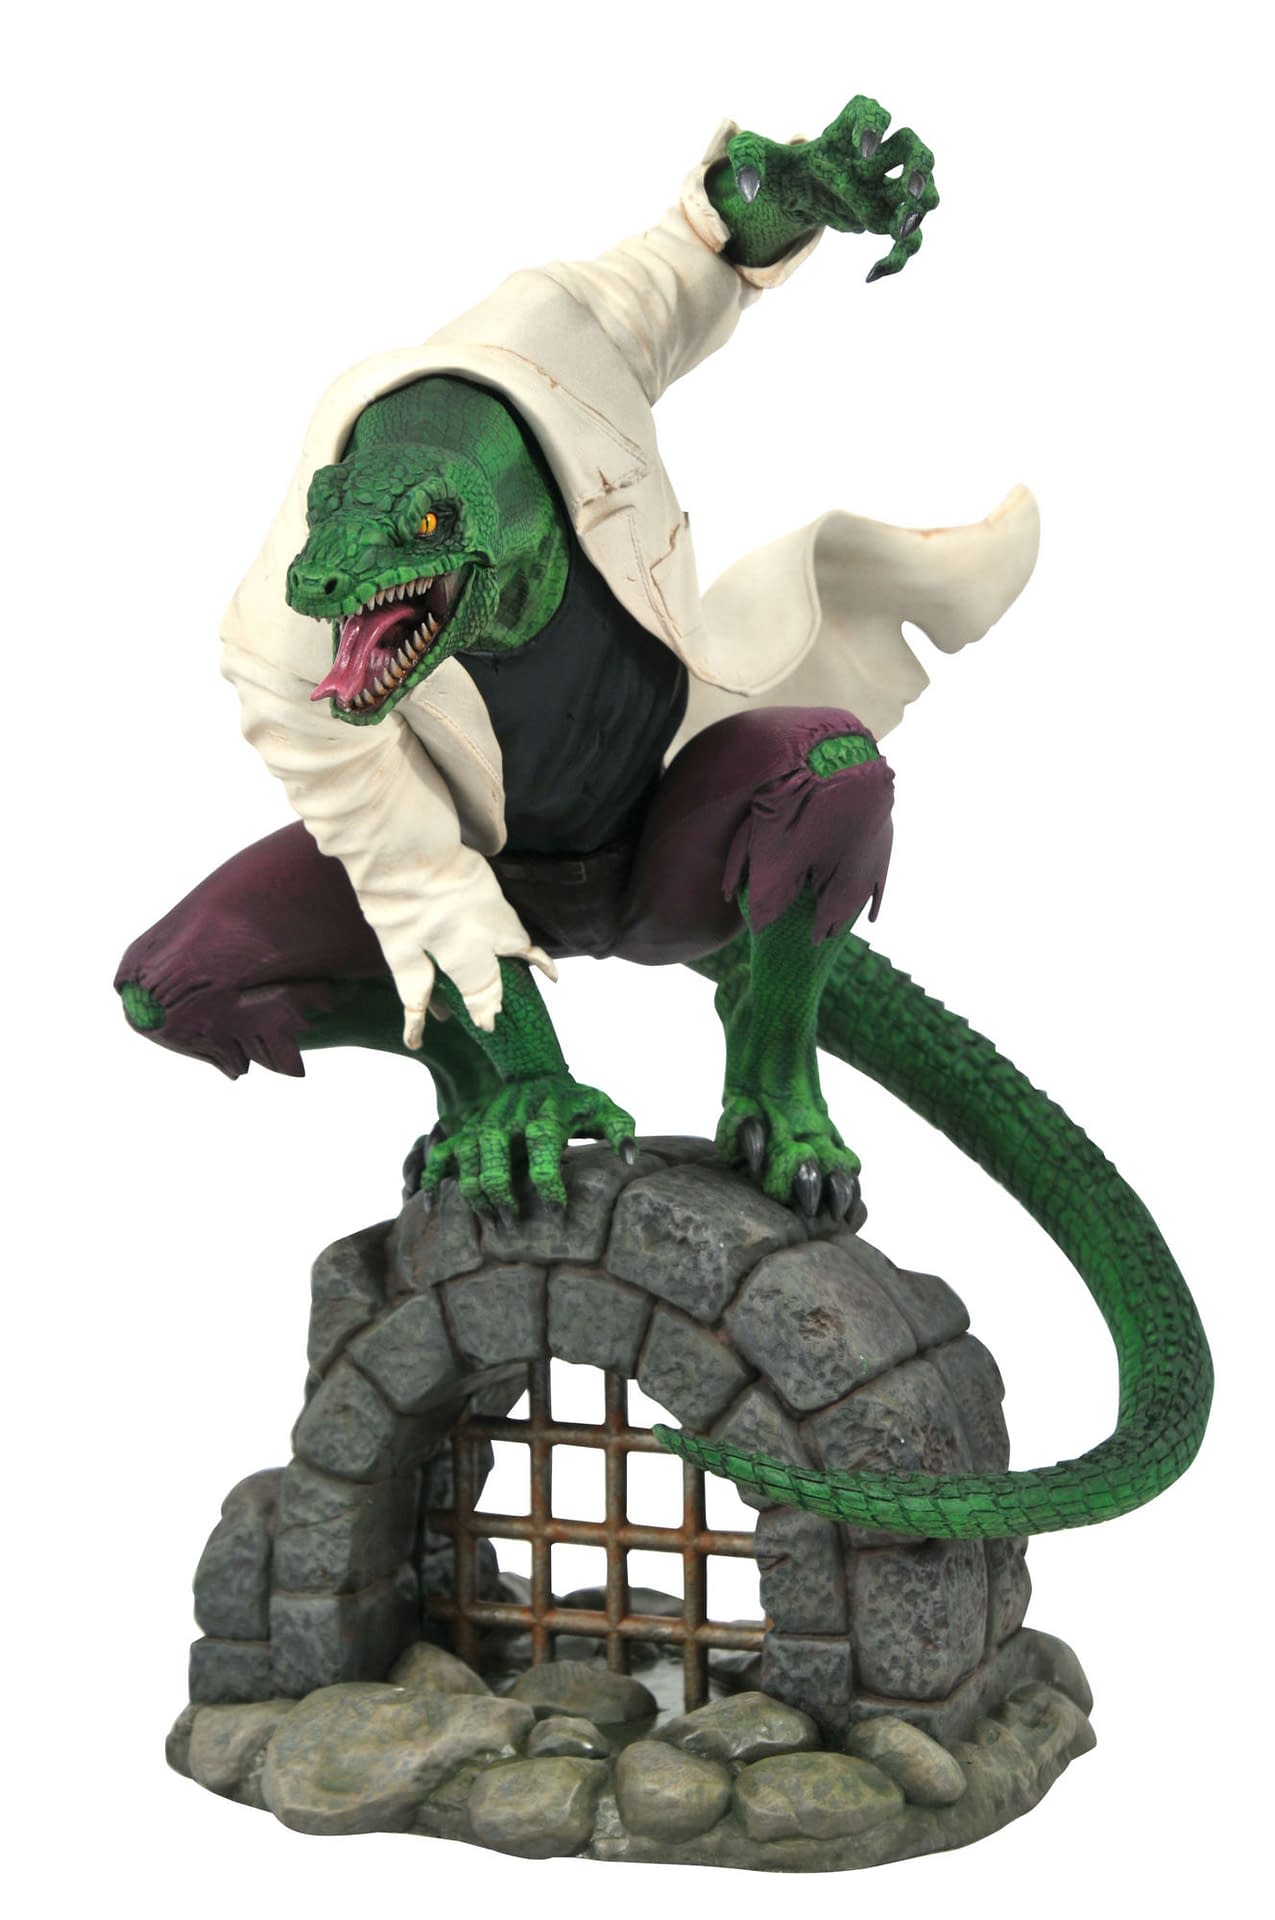 New Marvel Diamond Select Statues Include The Lizard and More